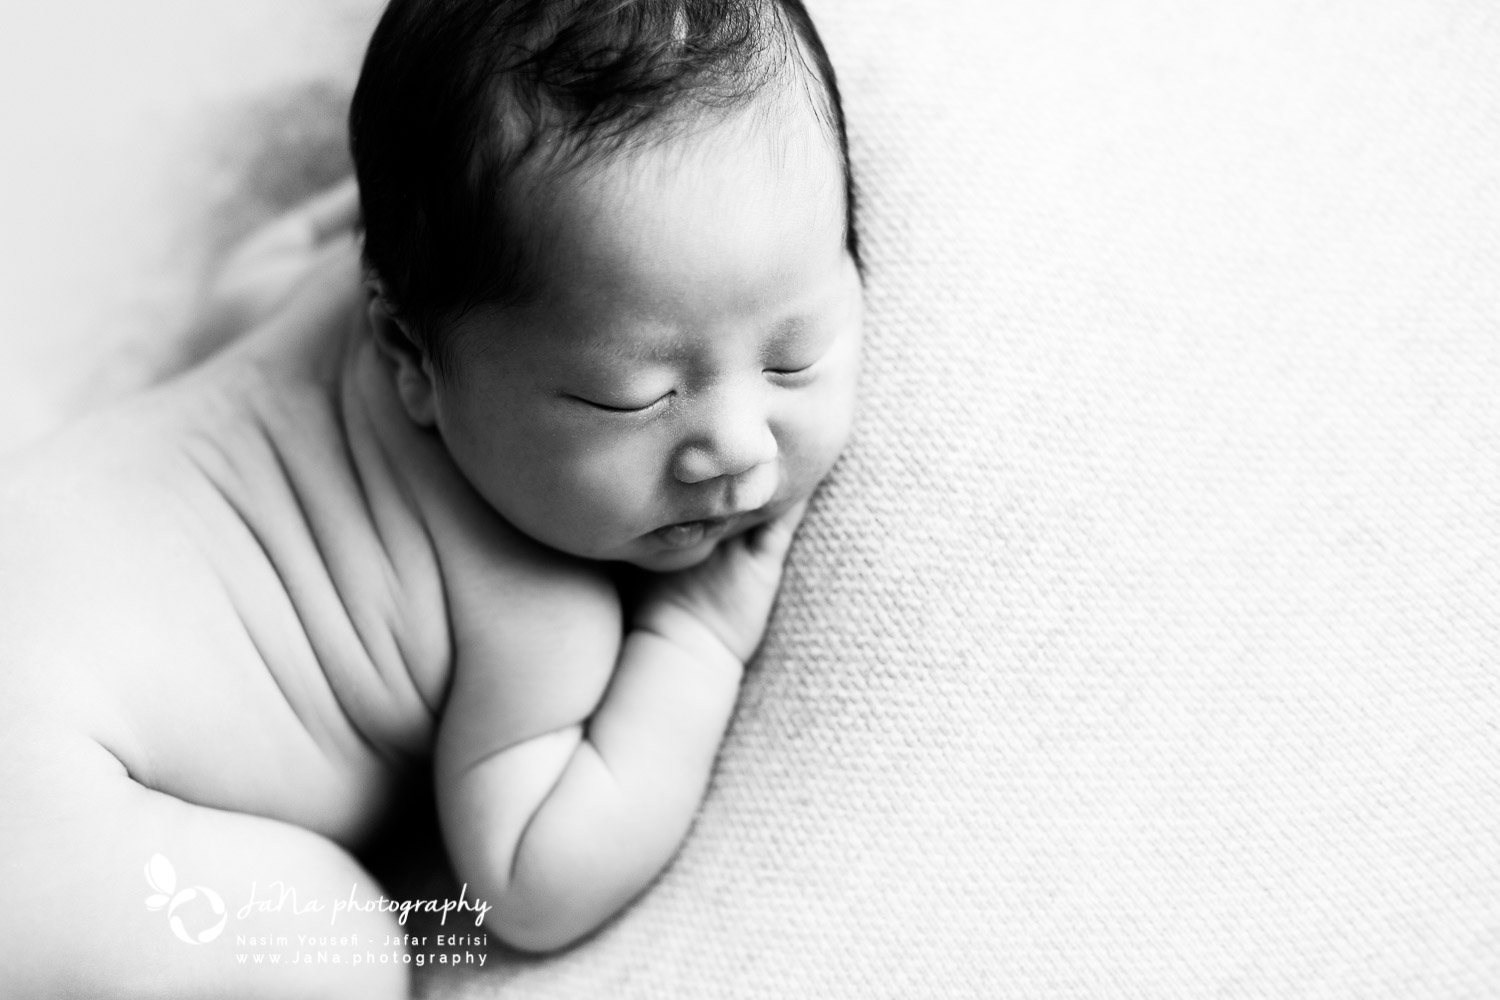 Newborn photography Vancouver - Black and white